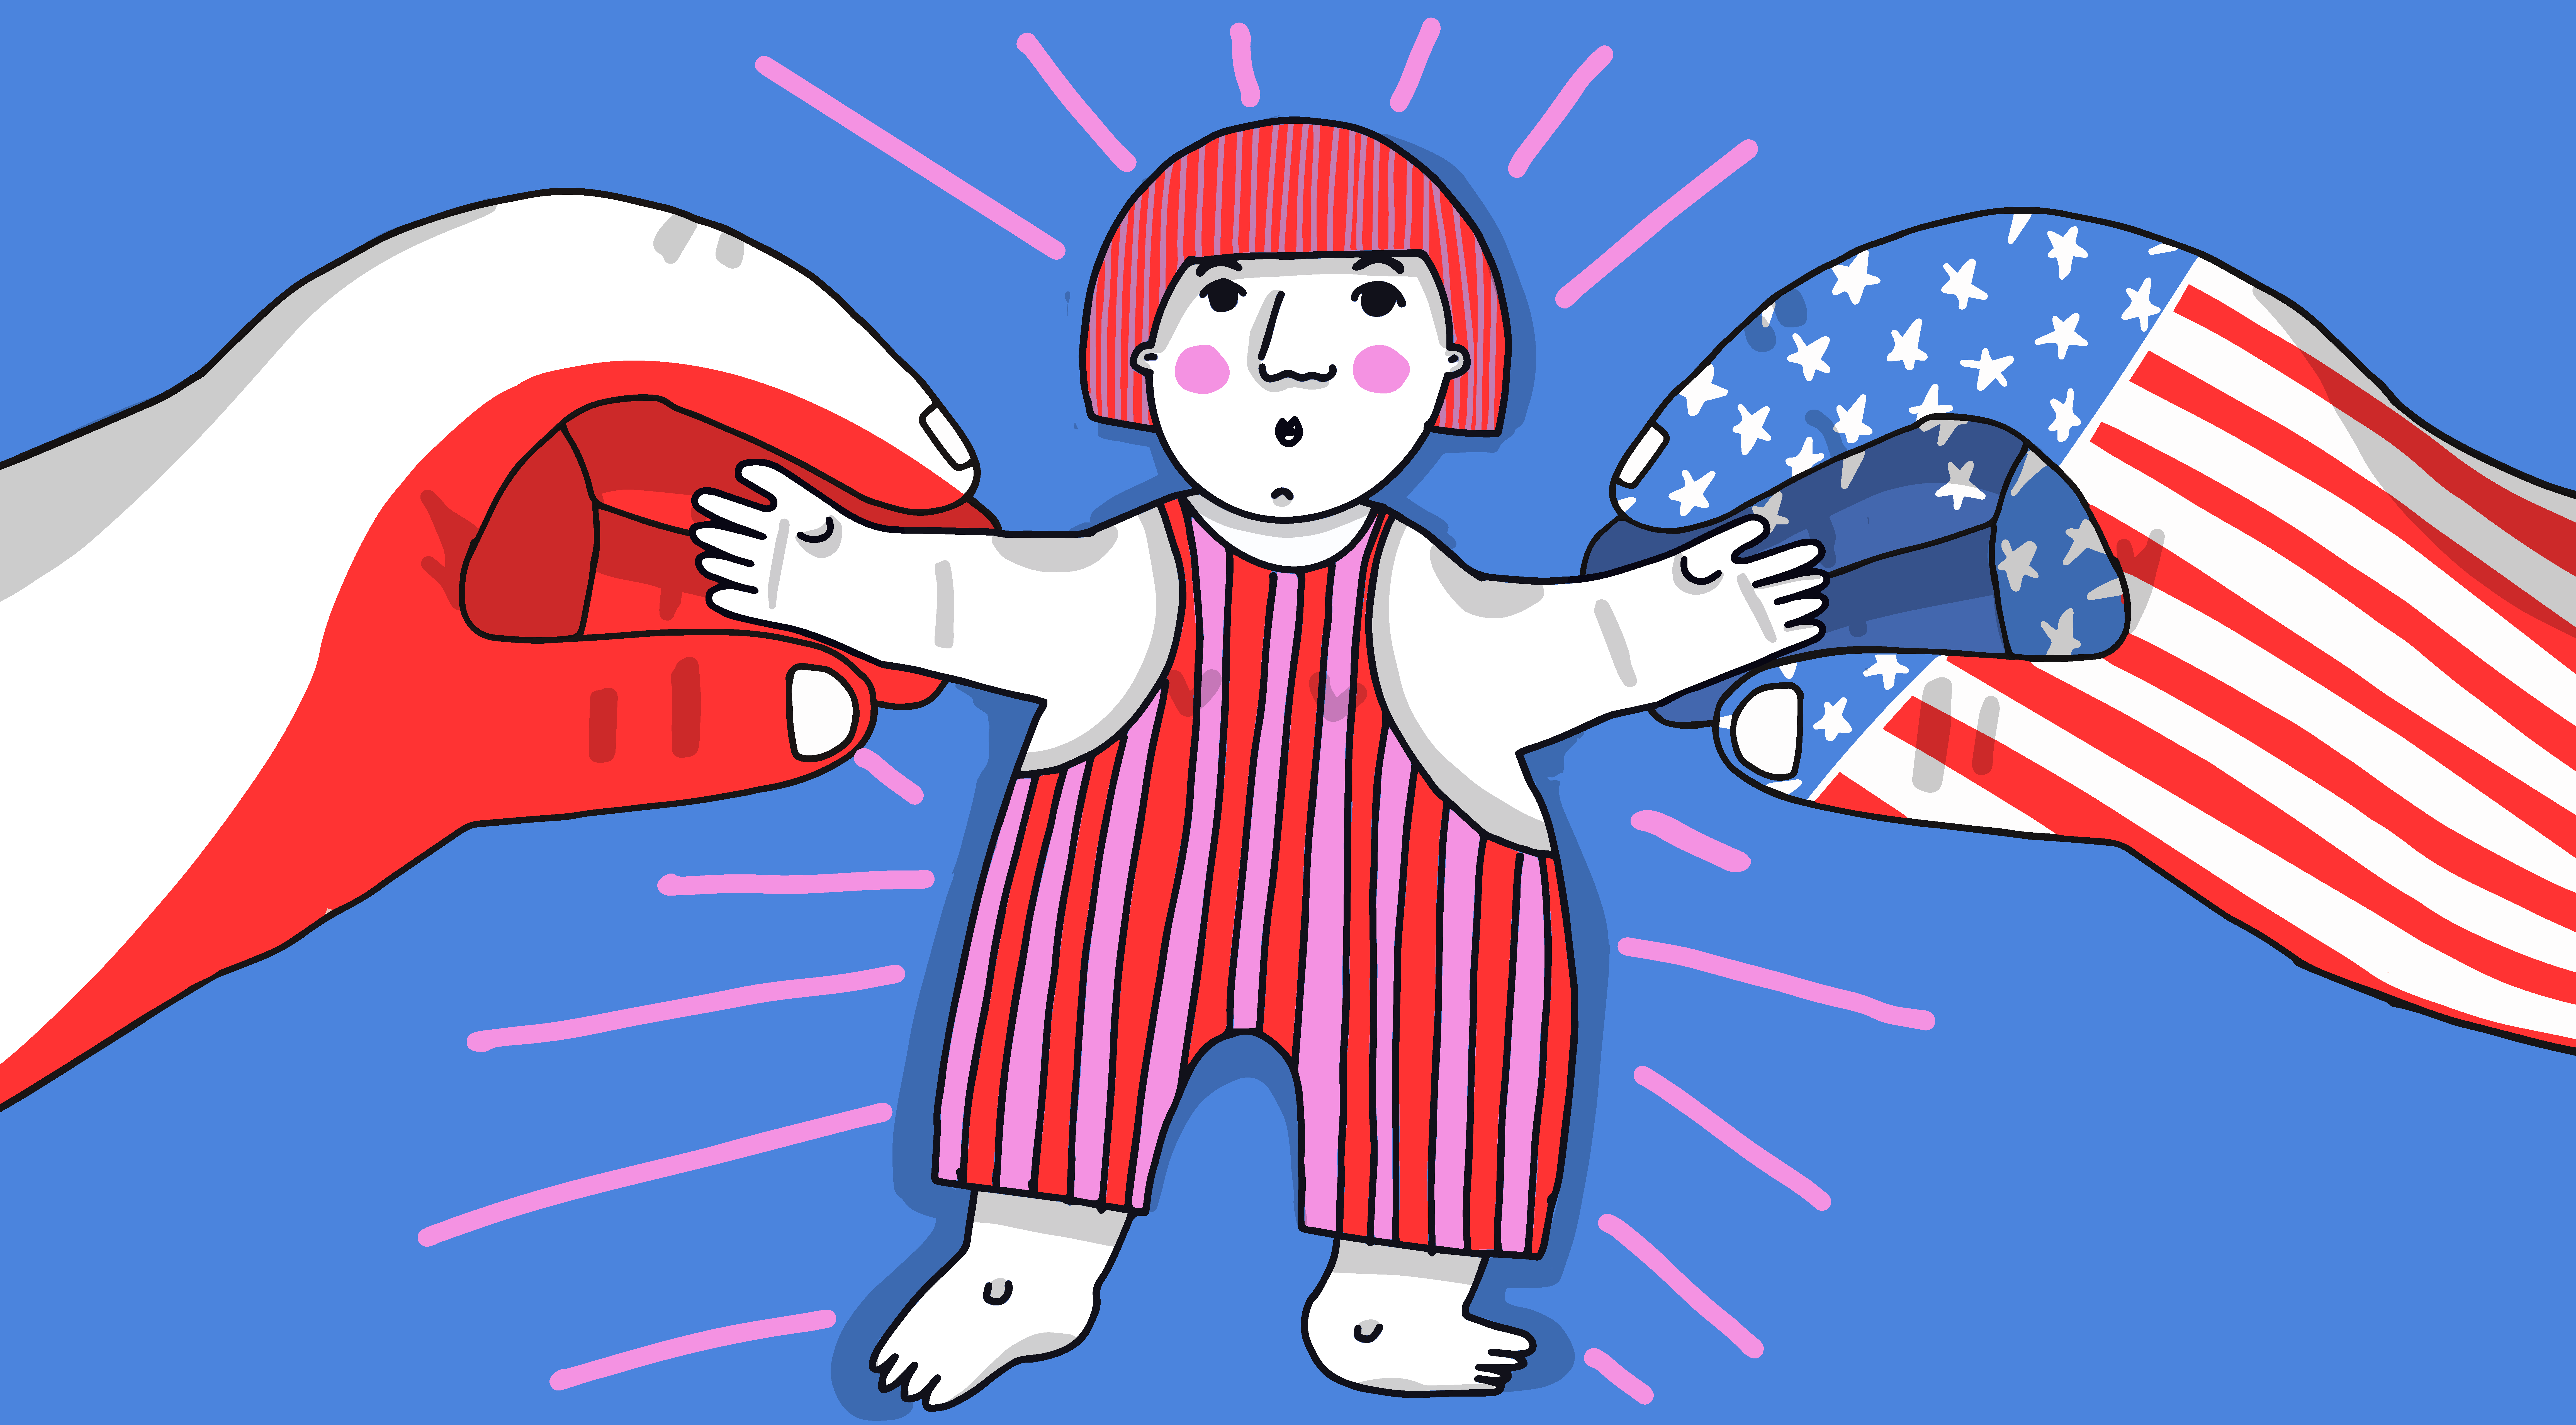 A figure stands in the middle of two large hands, one with an American and one with a Polish flag, both grabbing her